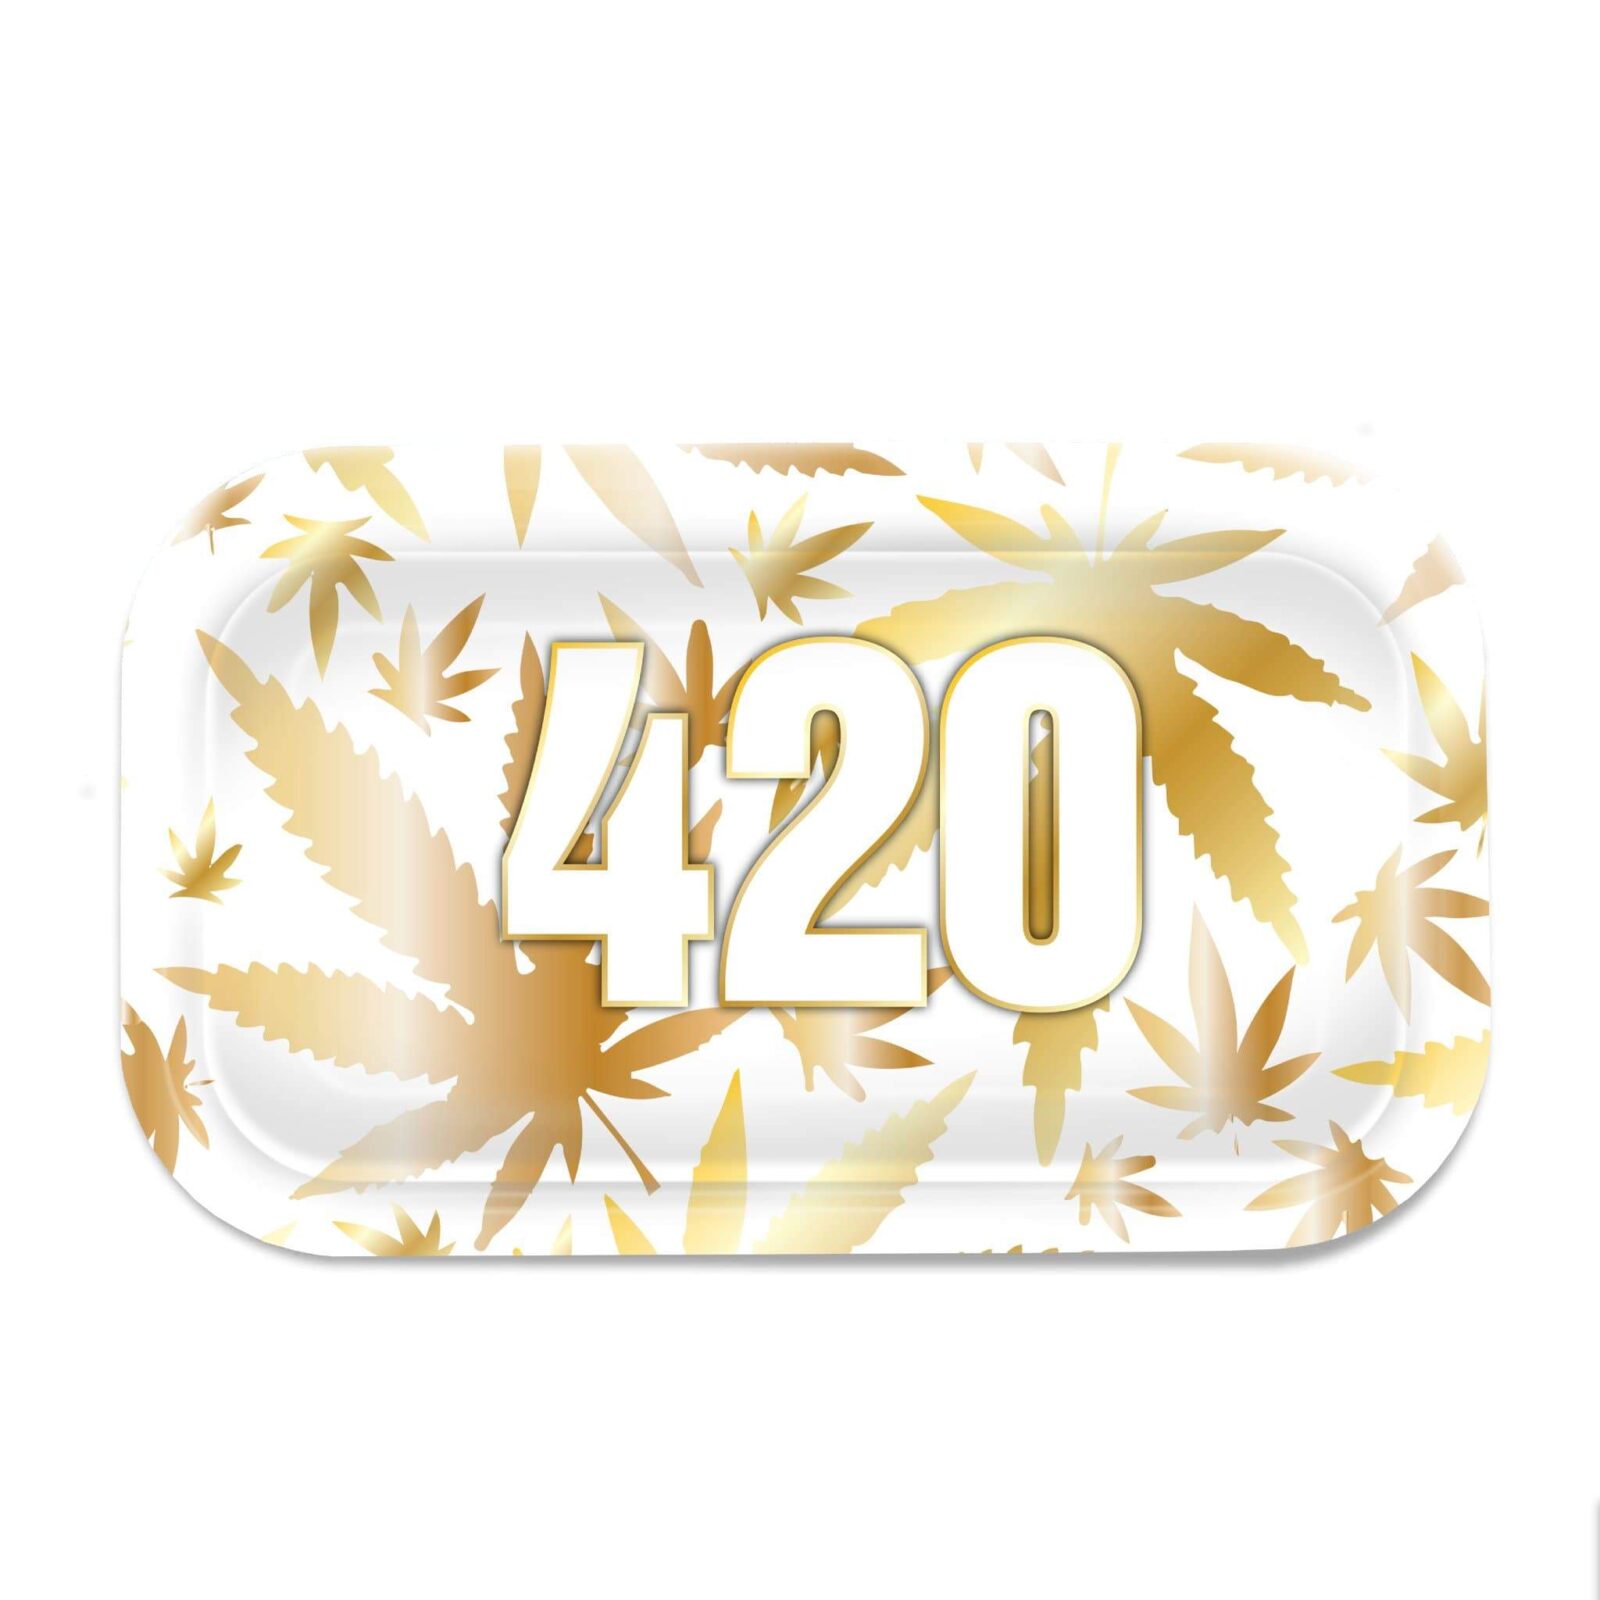 v syndicate yellow 420 rectangle rolling glass tray image